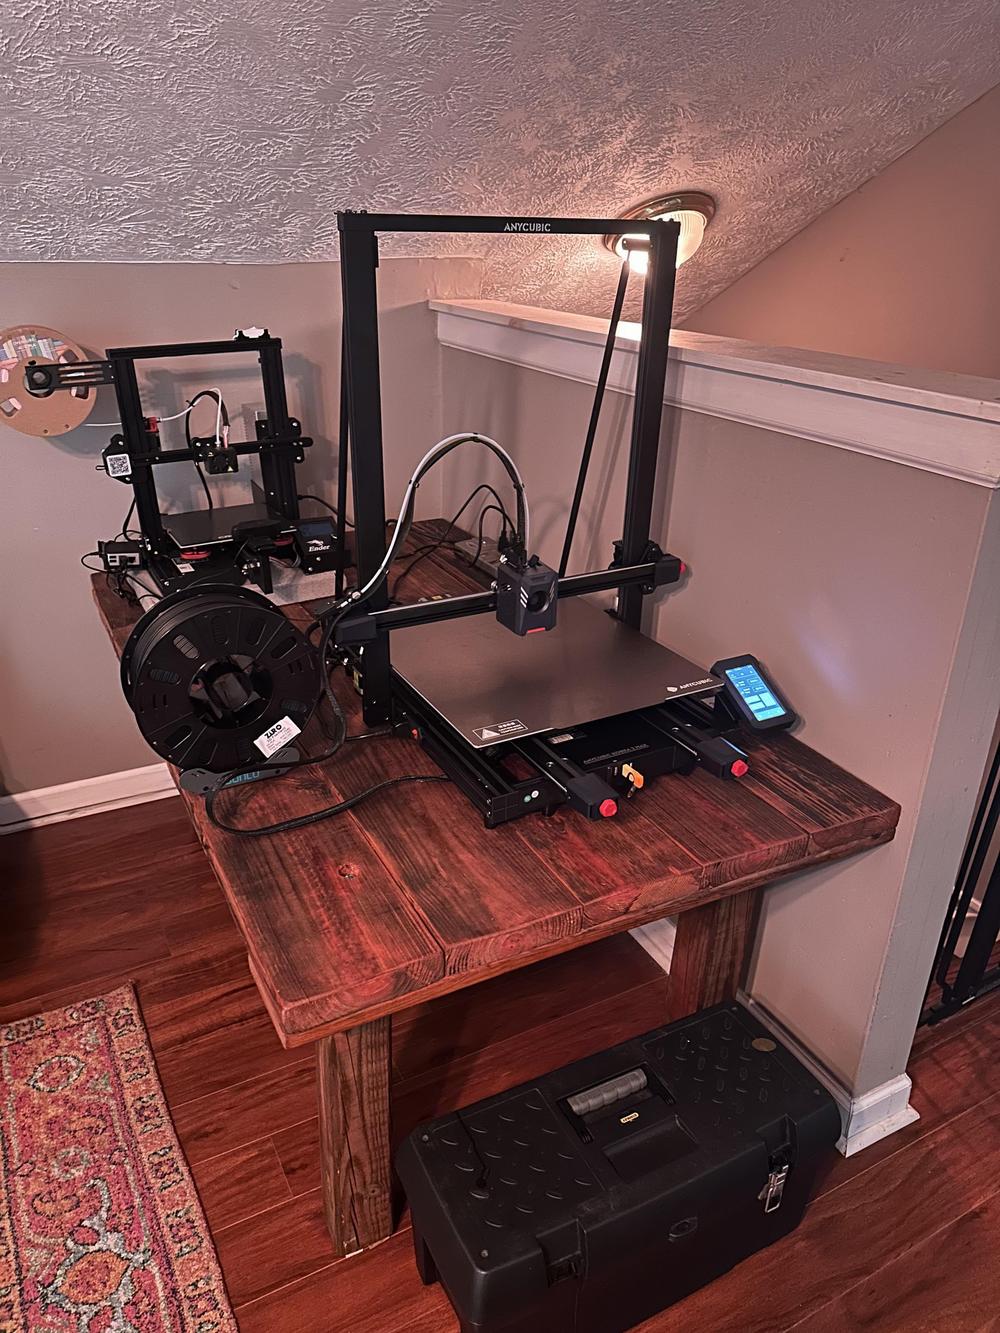 Two 3D printers sit on a wooden table in a room with a tan carpet and white walls.